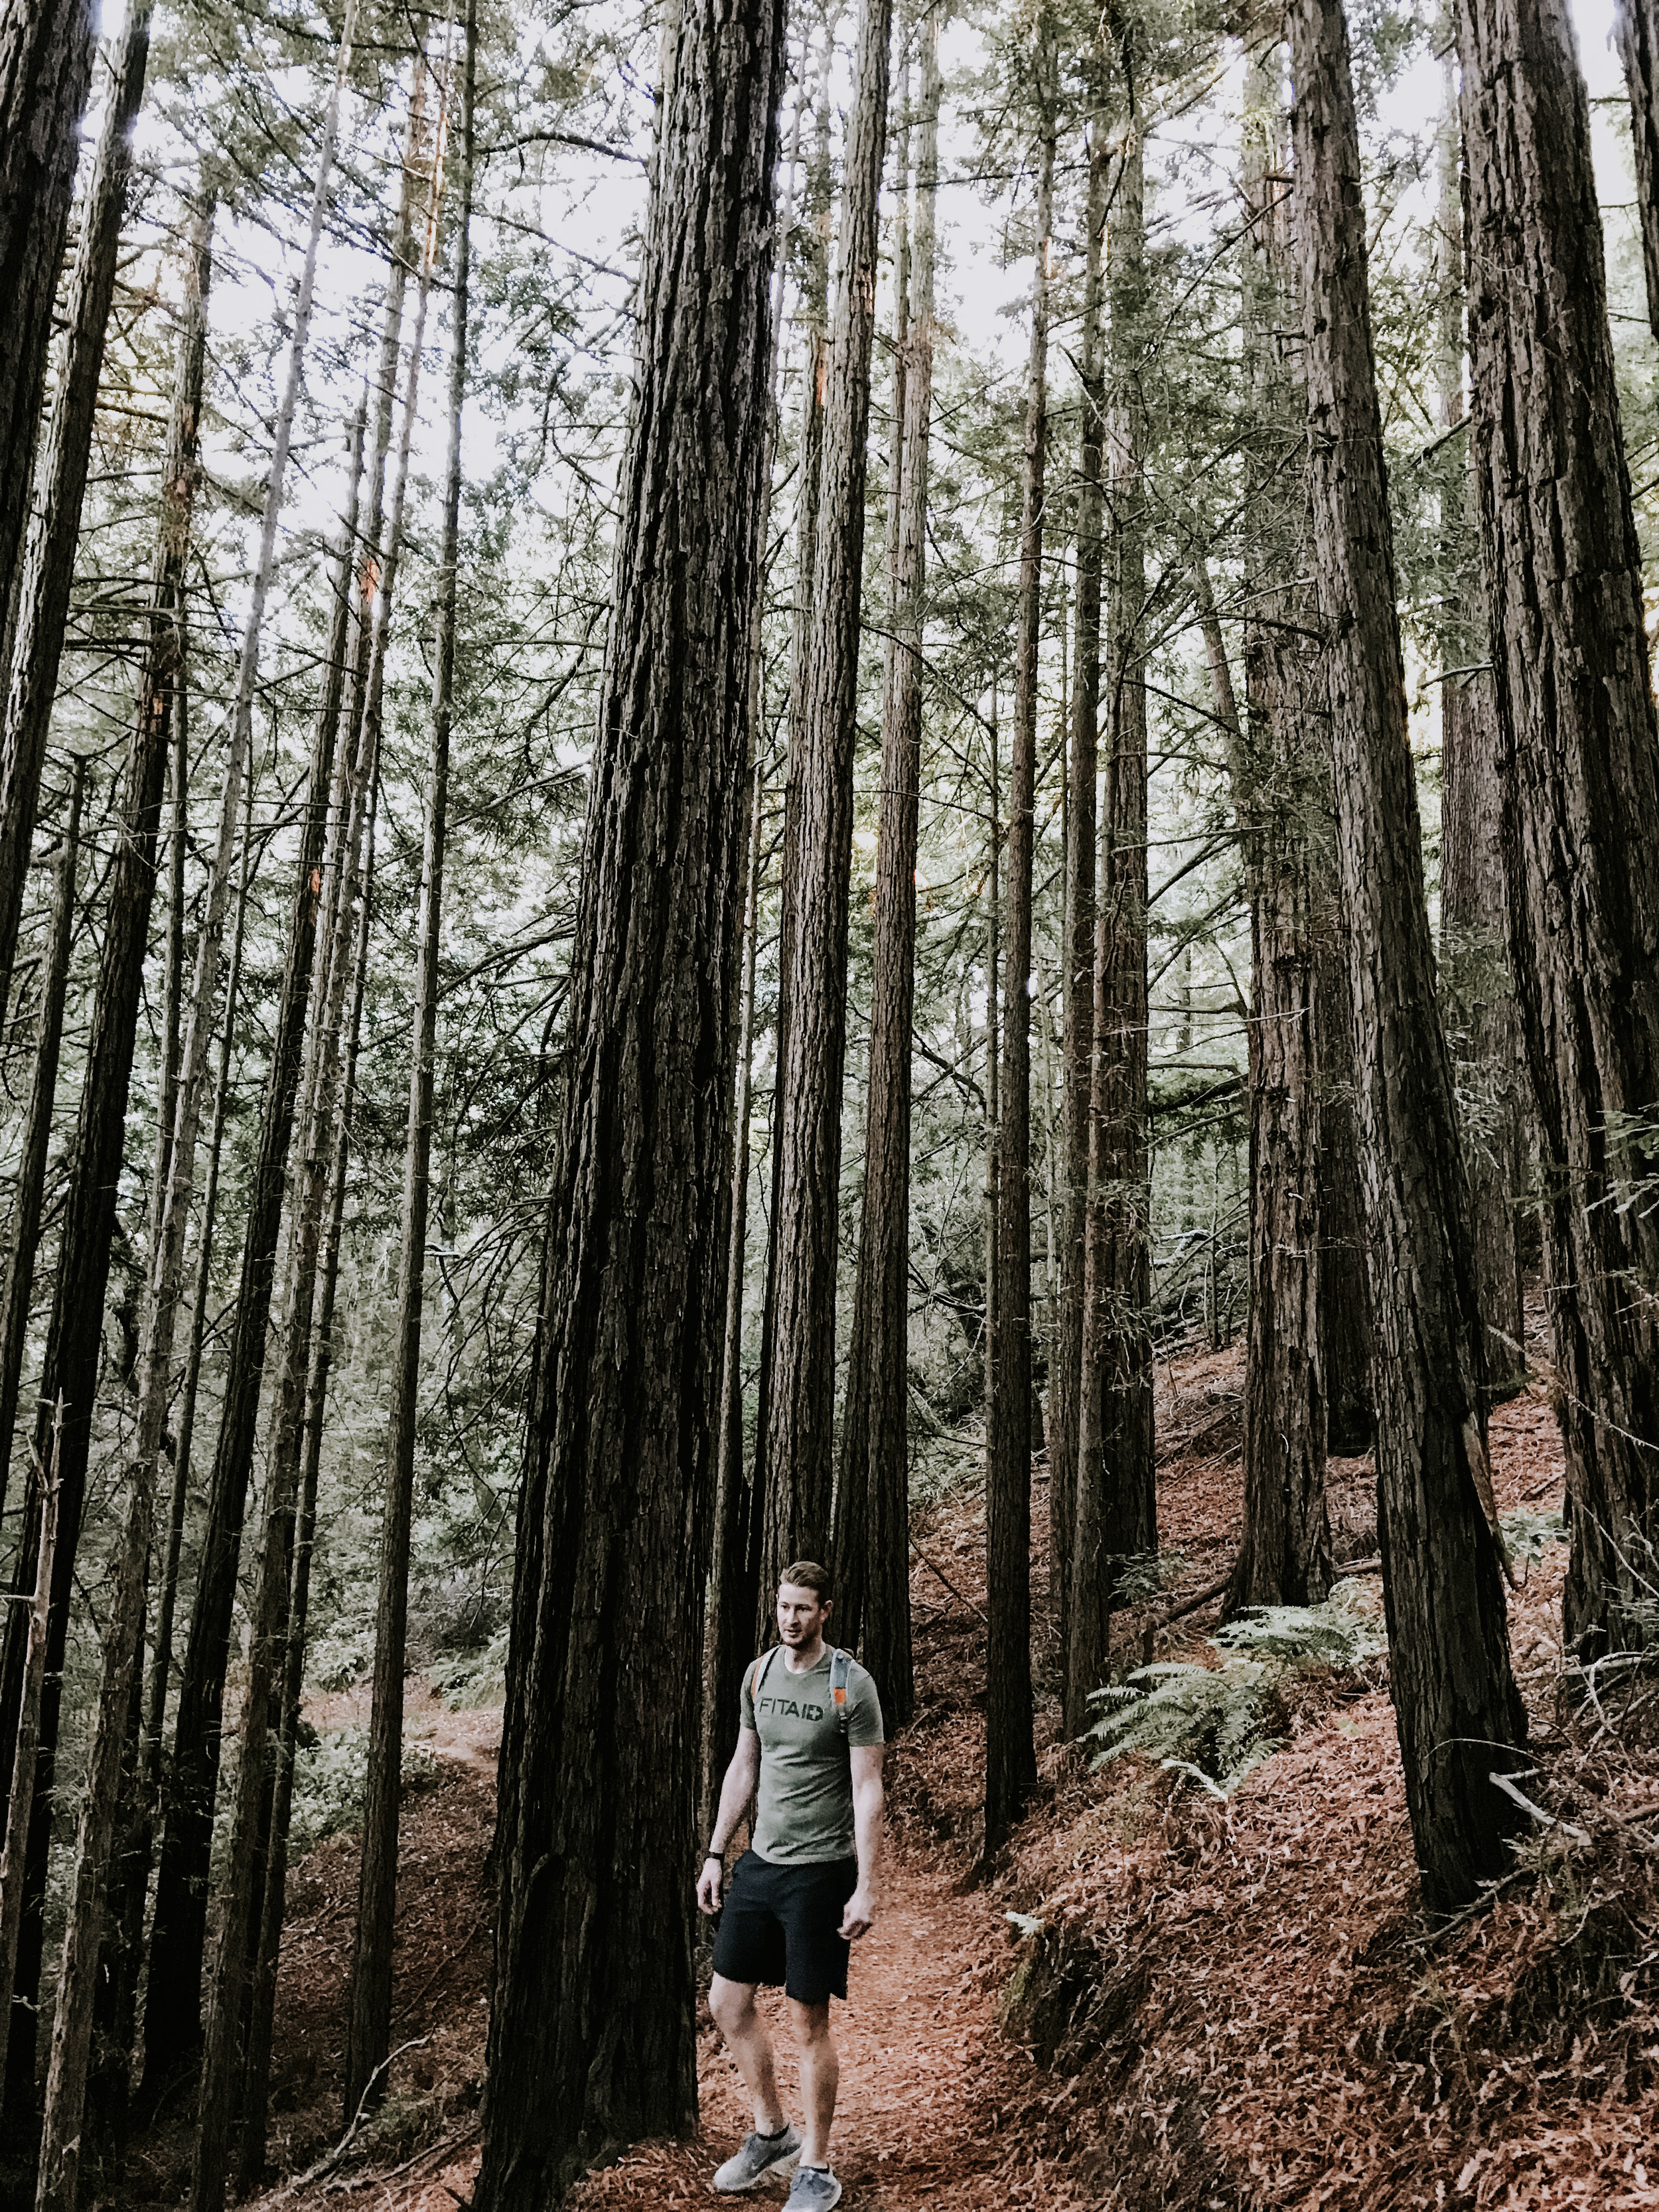 our trip to San Francisco - hiking in the redwoods in Mill Valley